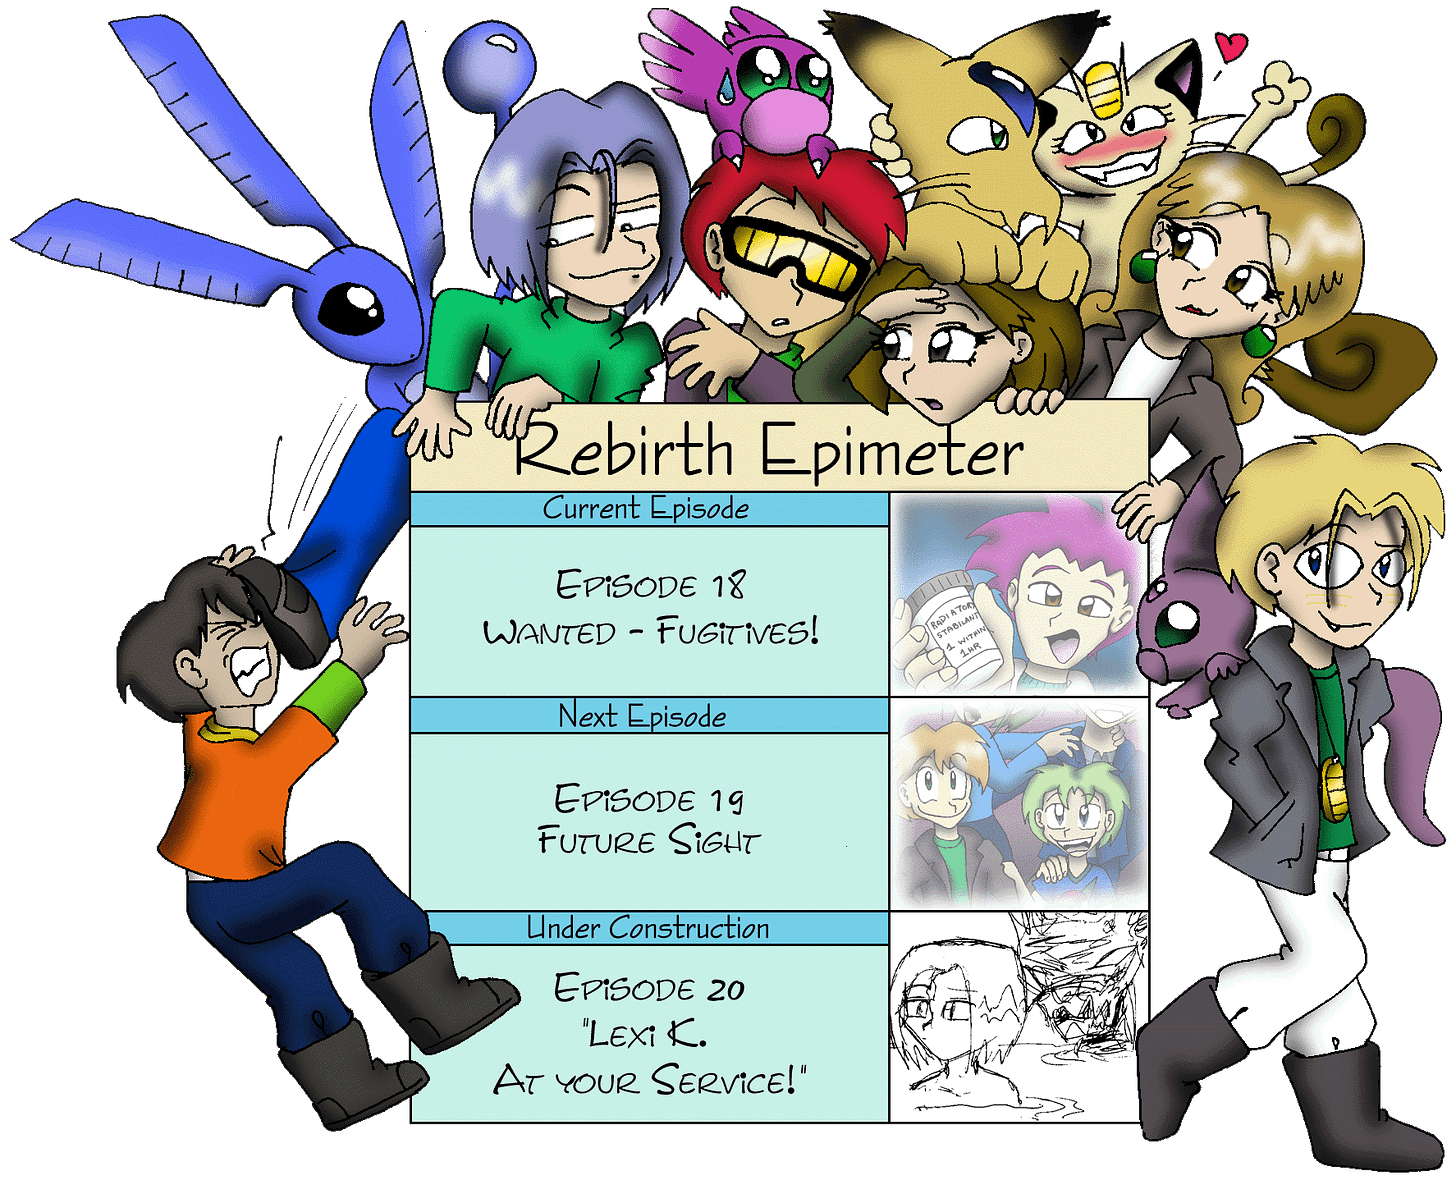 An art asset showcasing the Episode Board from the website in 2002